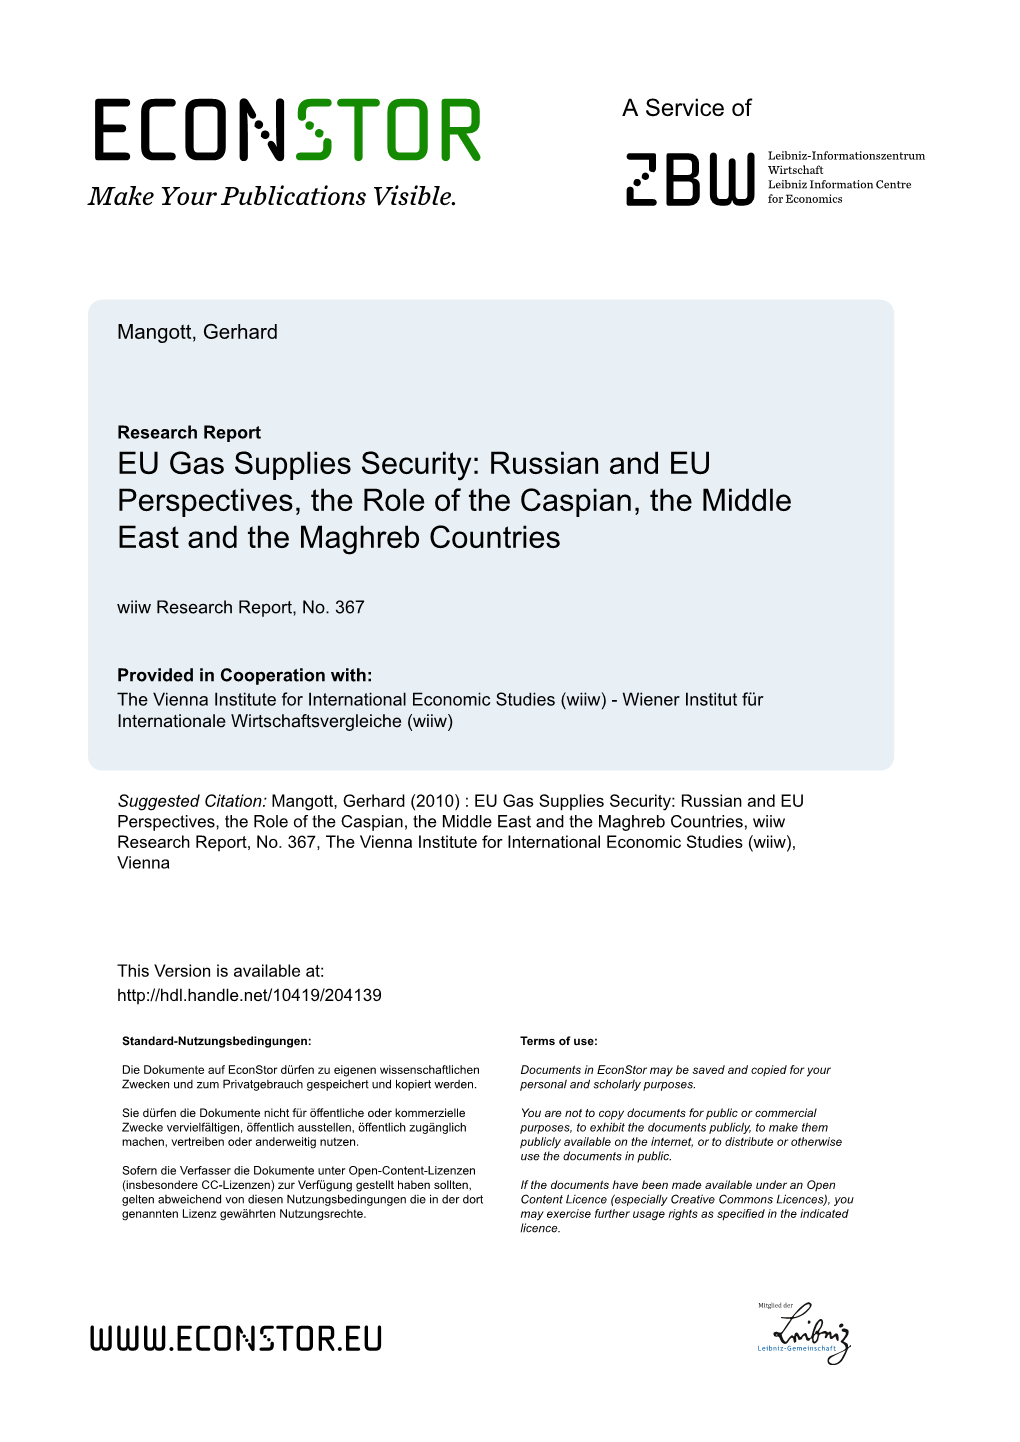 Wiiw Research Report 367: EU Gas Supplies Security